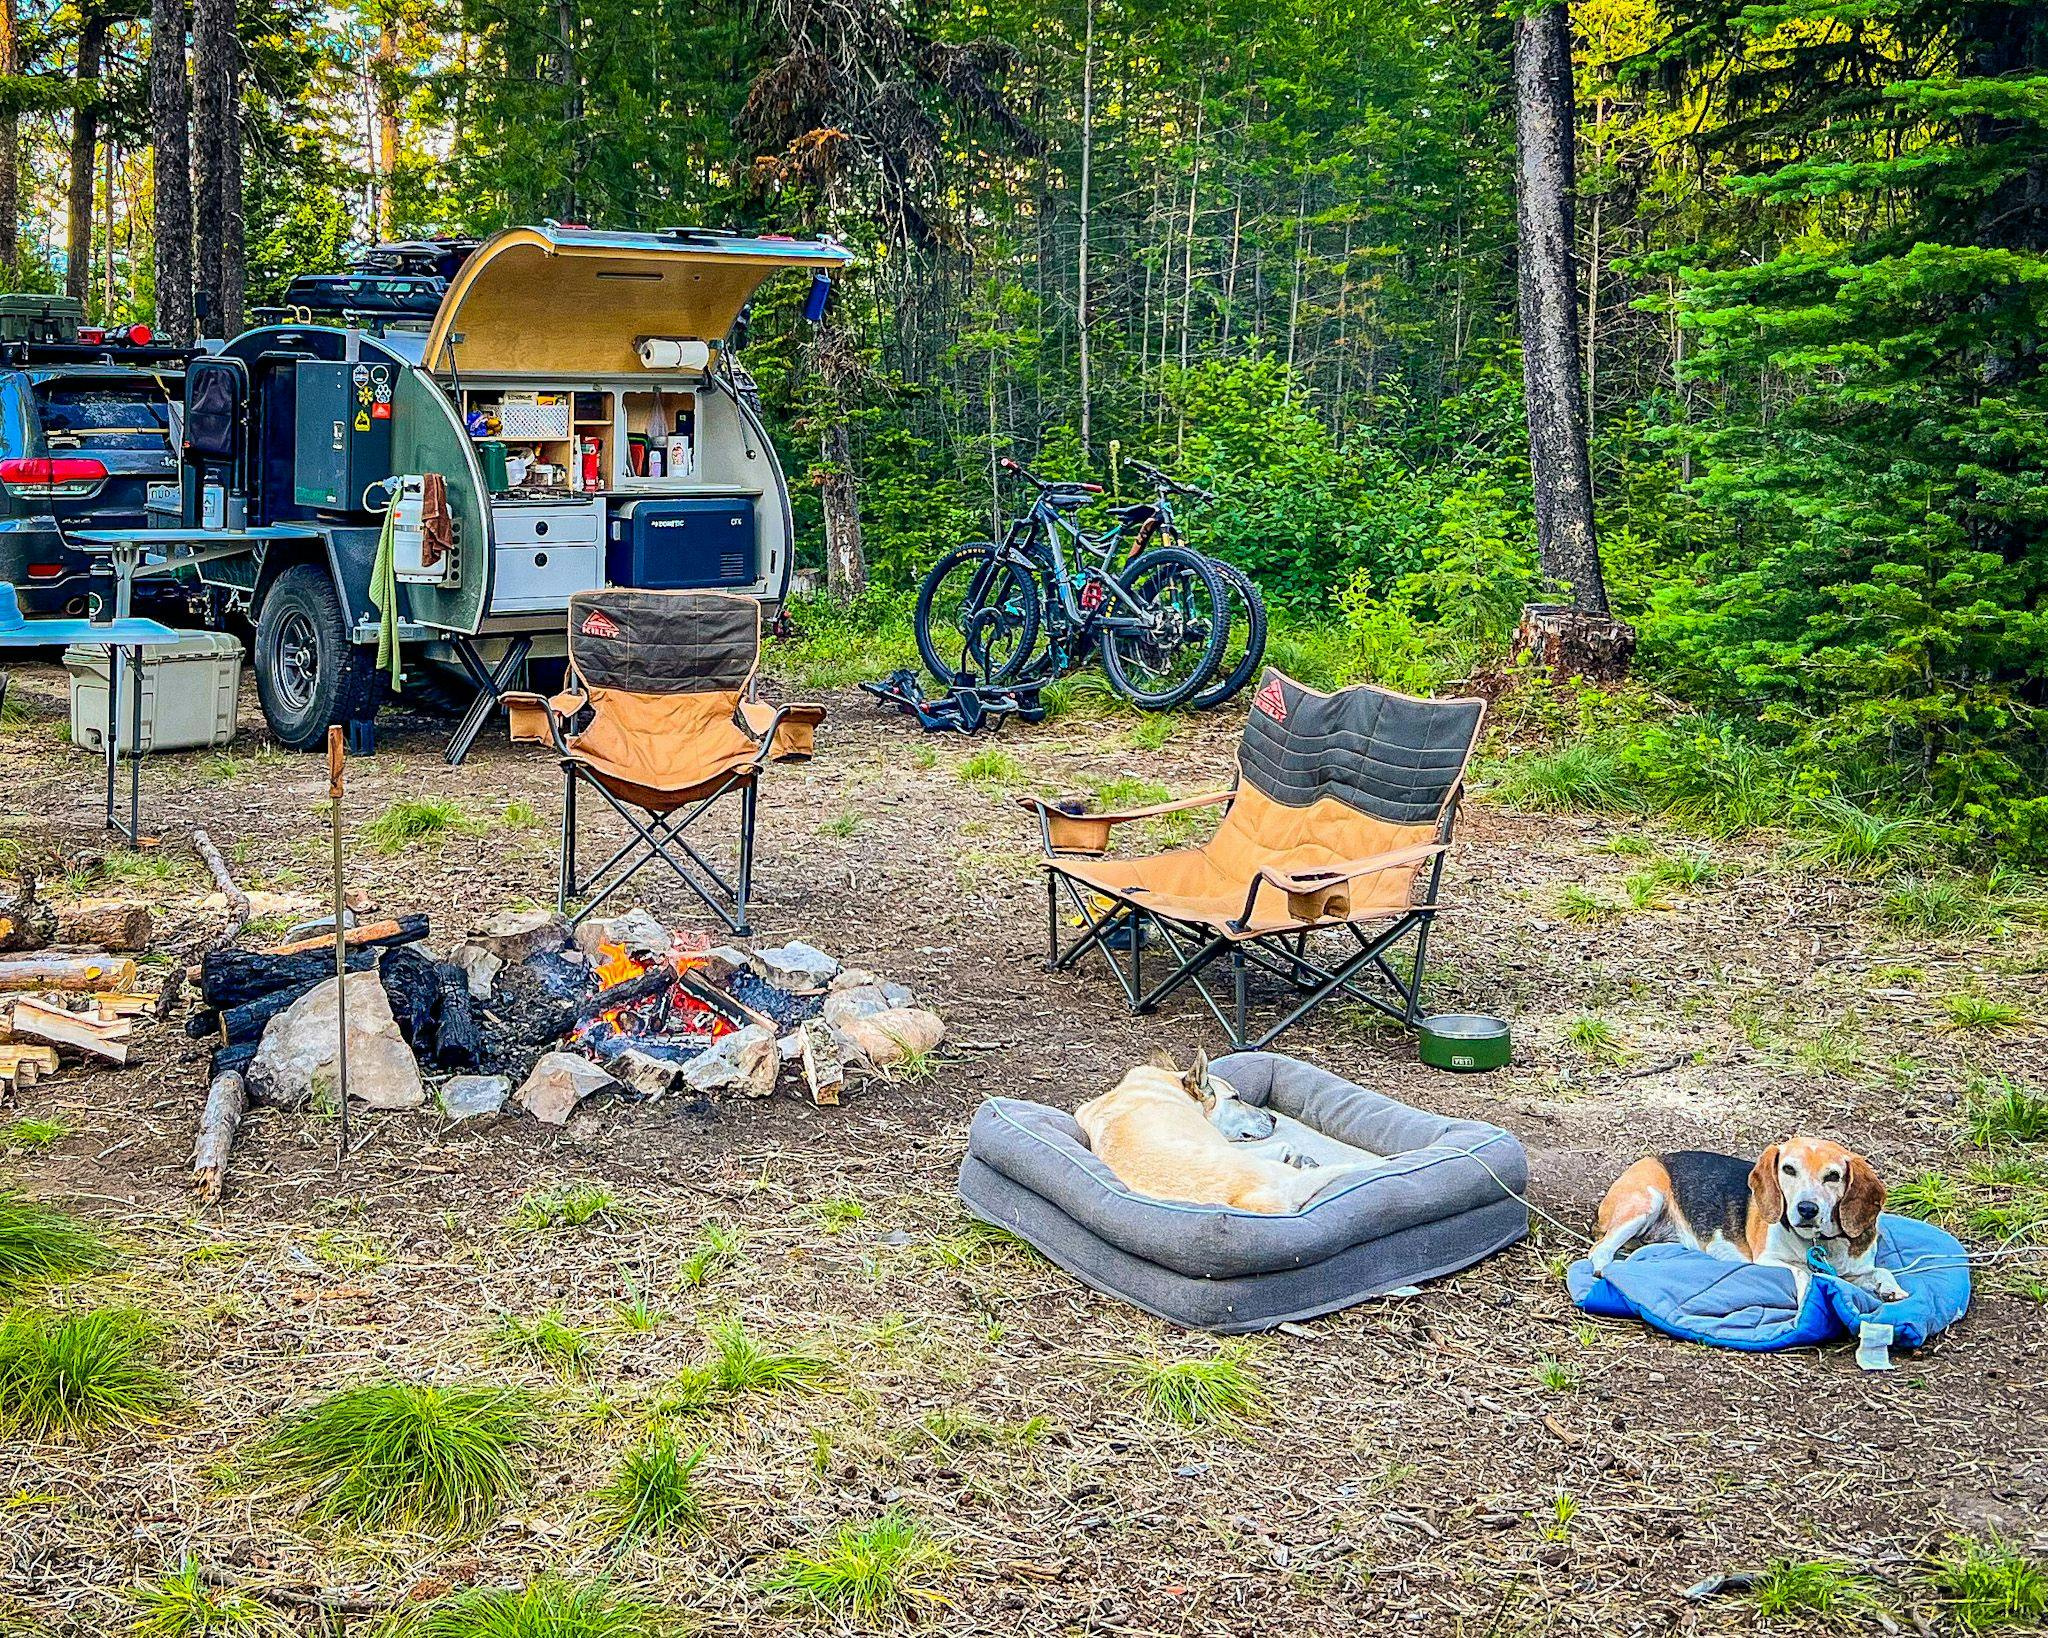 A picture of an Original TOPO, an offroad trailer set up at camp.